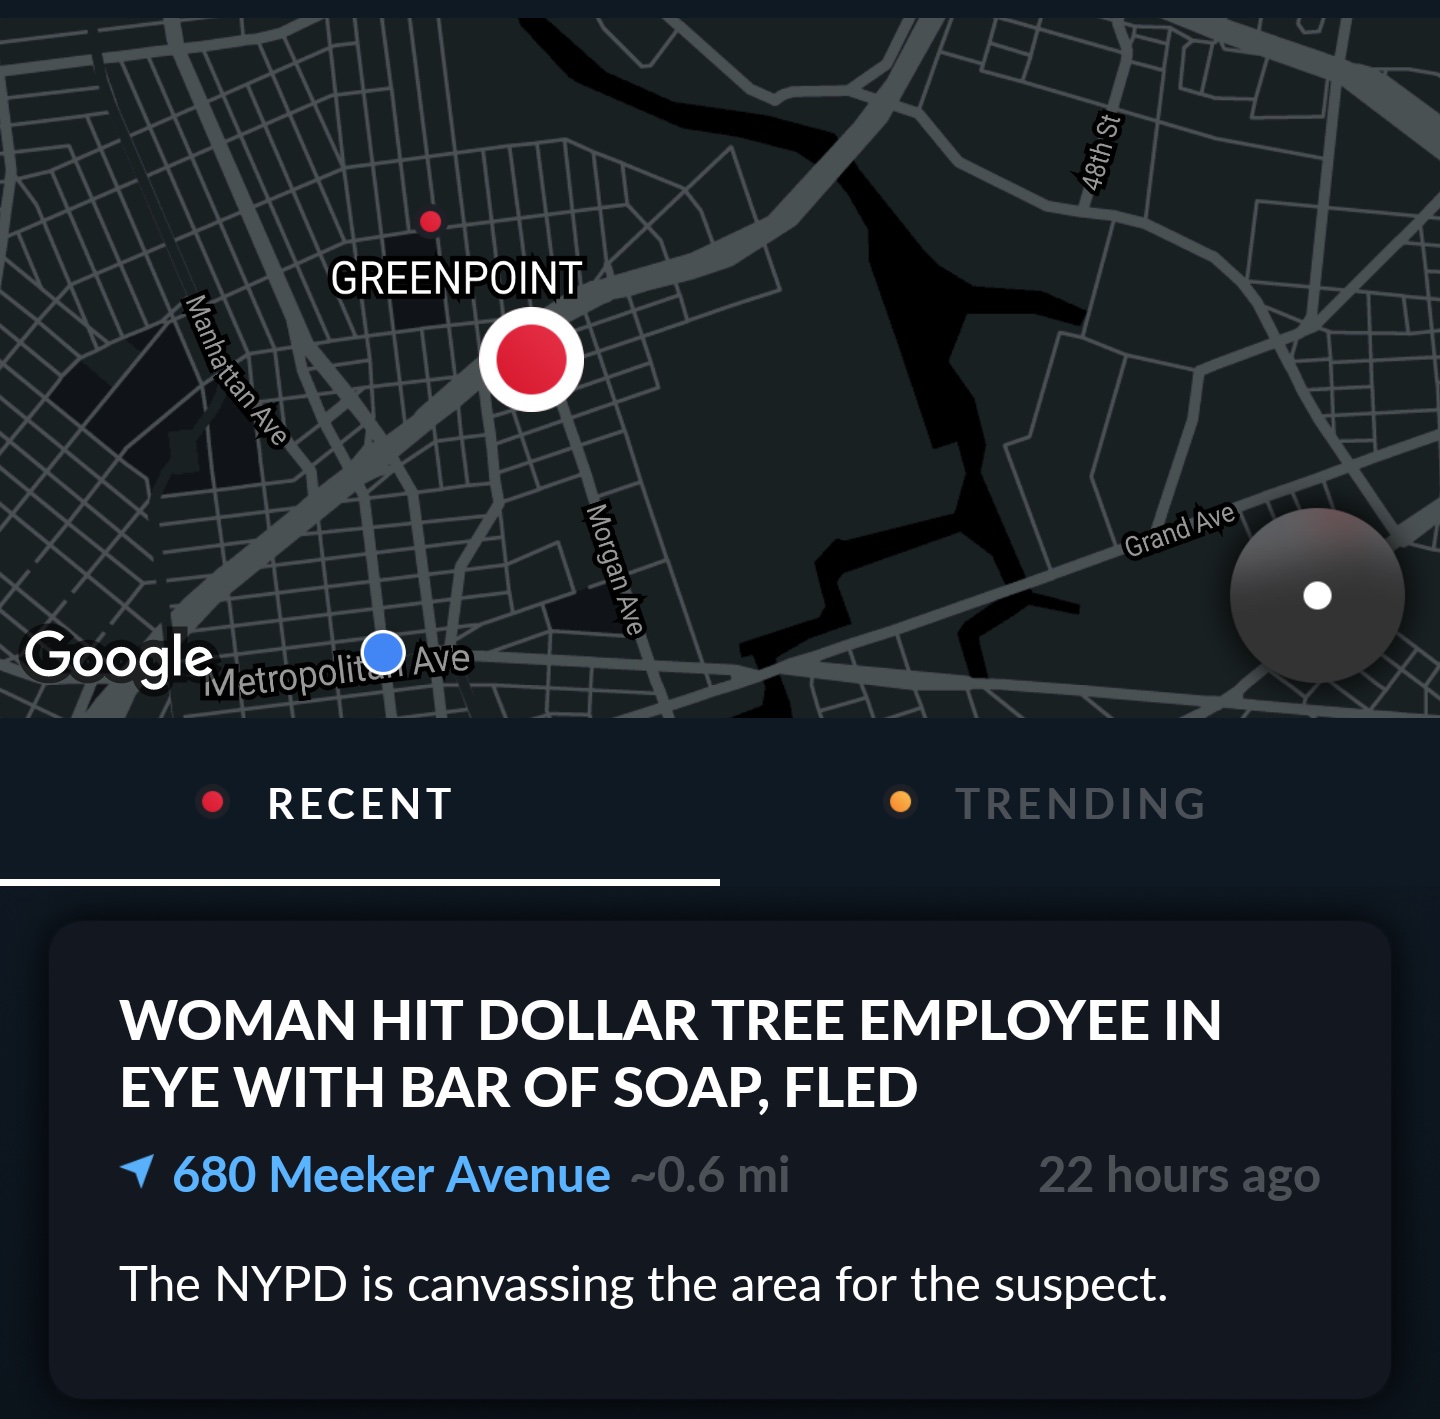 synagogue de la paix - 48th St Greenpoint nhattan Ave Grand Ave Morgan Ave Google netropolio Ave Recent Trending Woman Hit Dollar Tree Employee In Eye With Bar Of Soap, Fled 1 680 Meeker Avenue ~0.6 mi 22 hours ago The Nypd is canvassing the area for the 